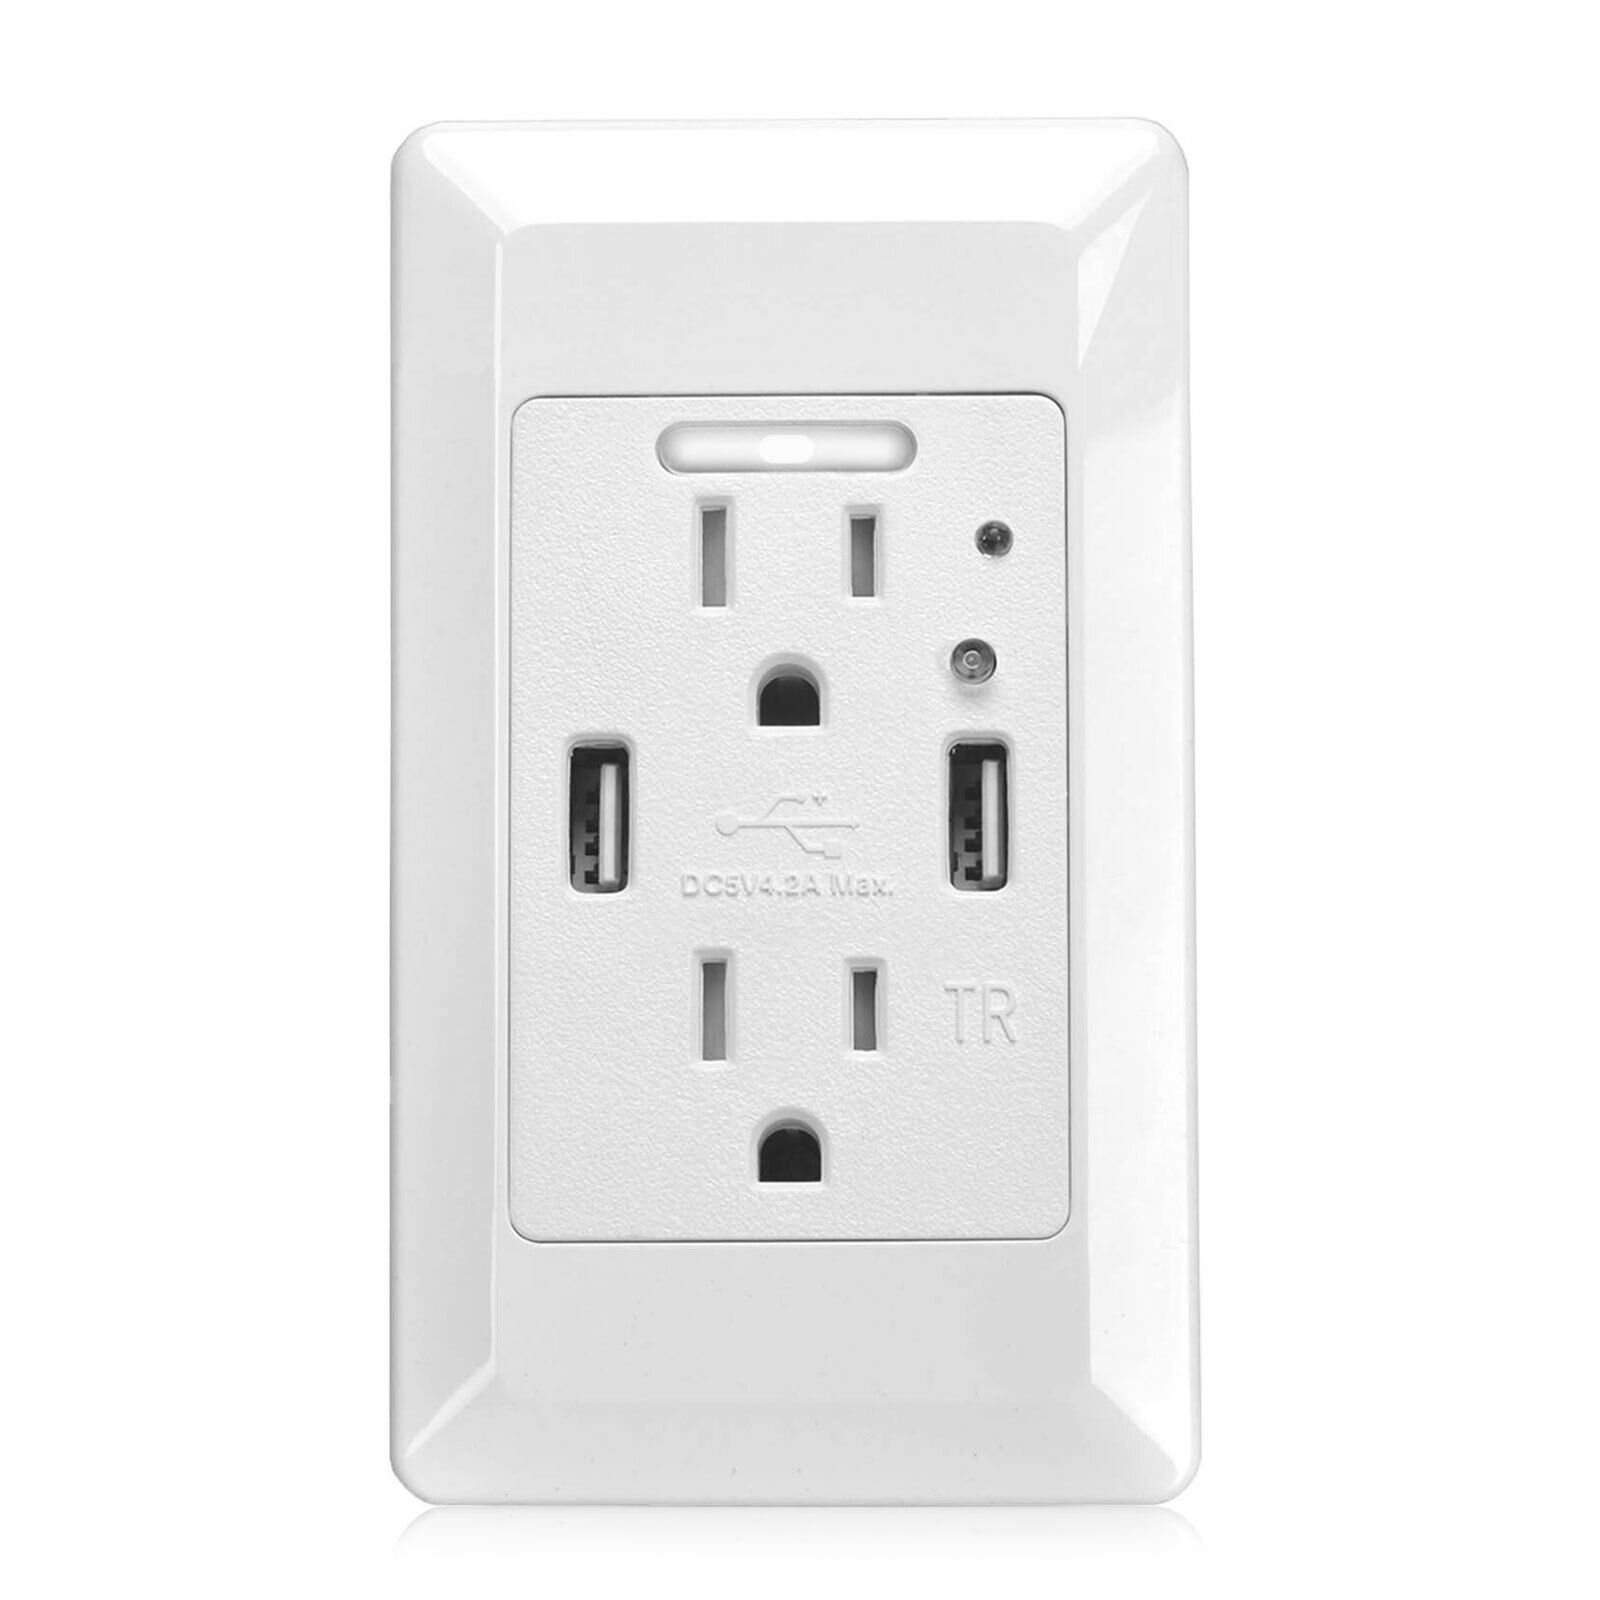 2 USB Ports 4.2A Smart Fast Charging Socket Wall Outlet with LED Night Light